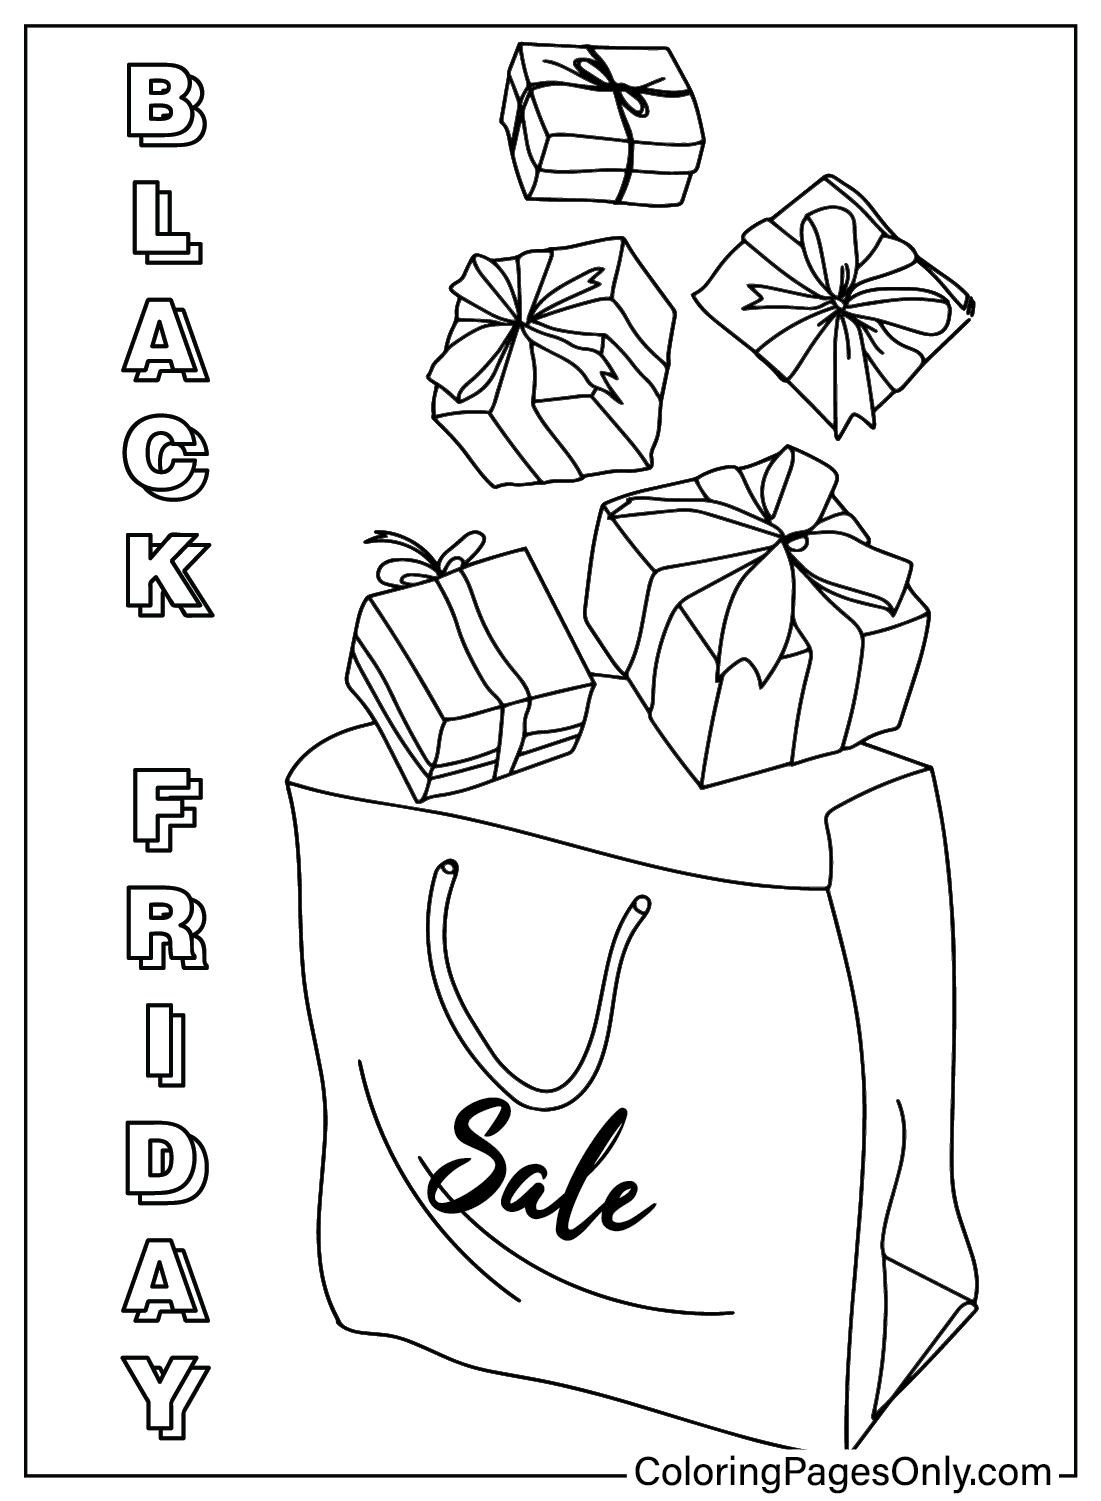 Black Friday Sale Coloring Page from Black Friday